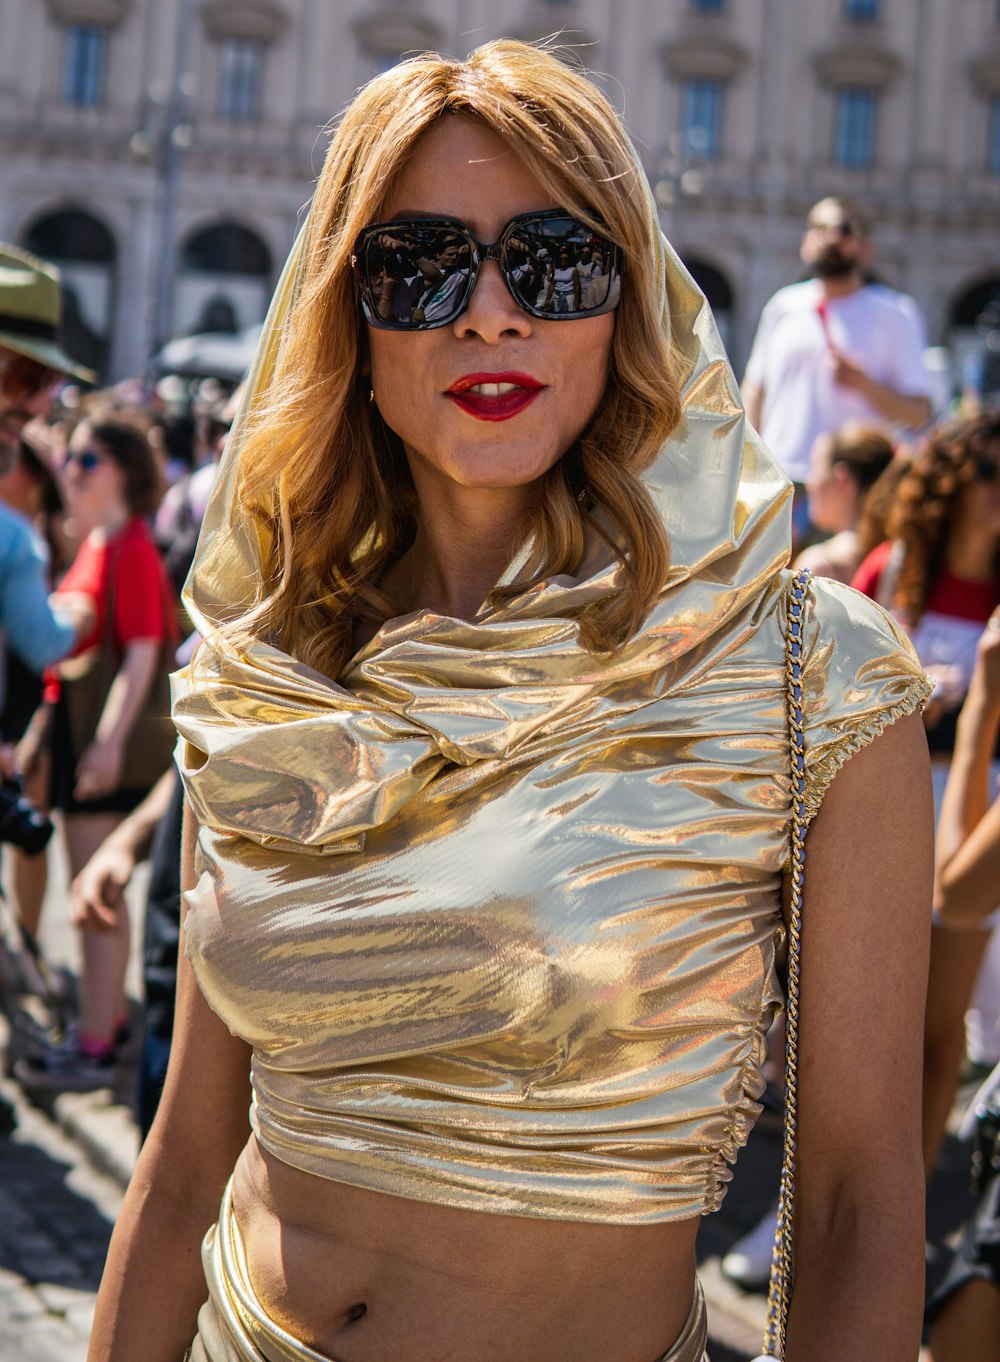 a woman wearing a gold outfit and sunglasses